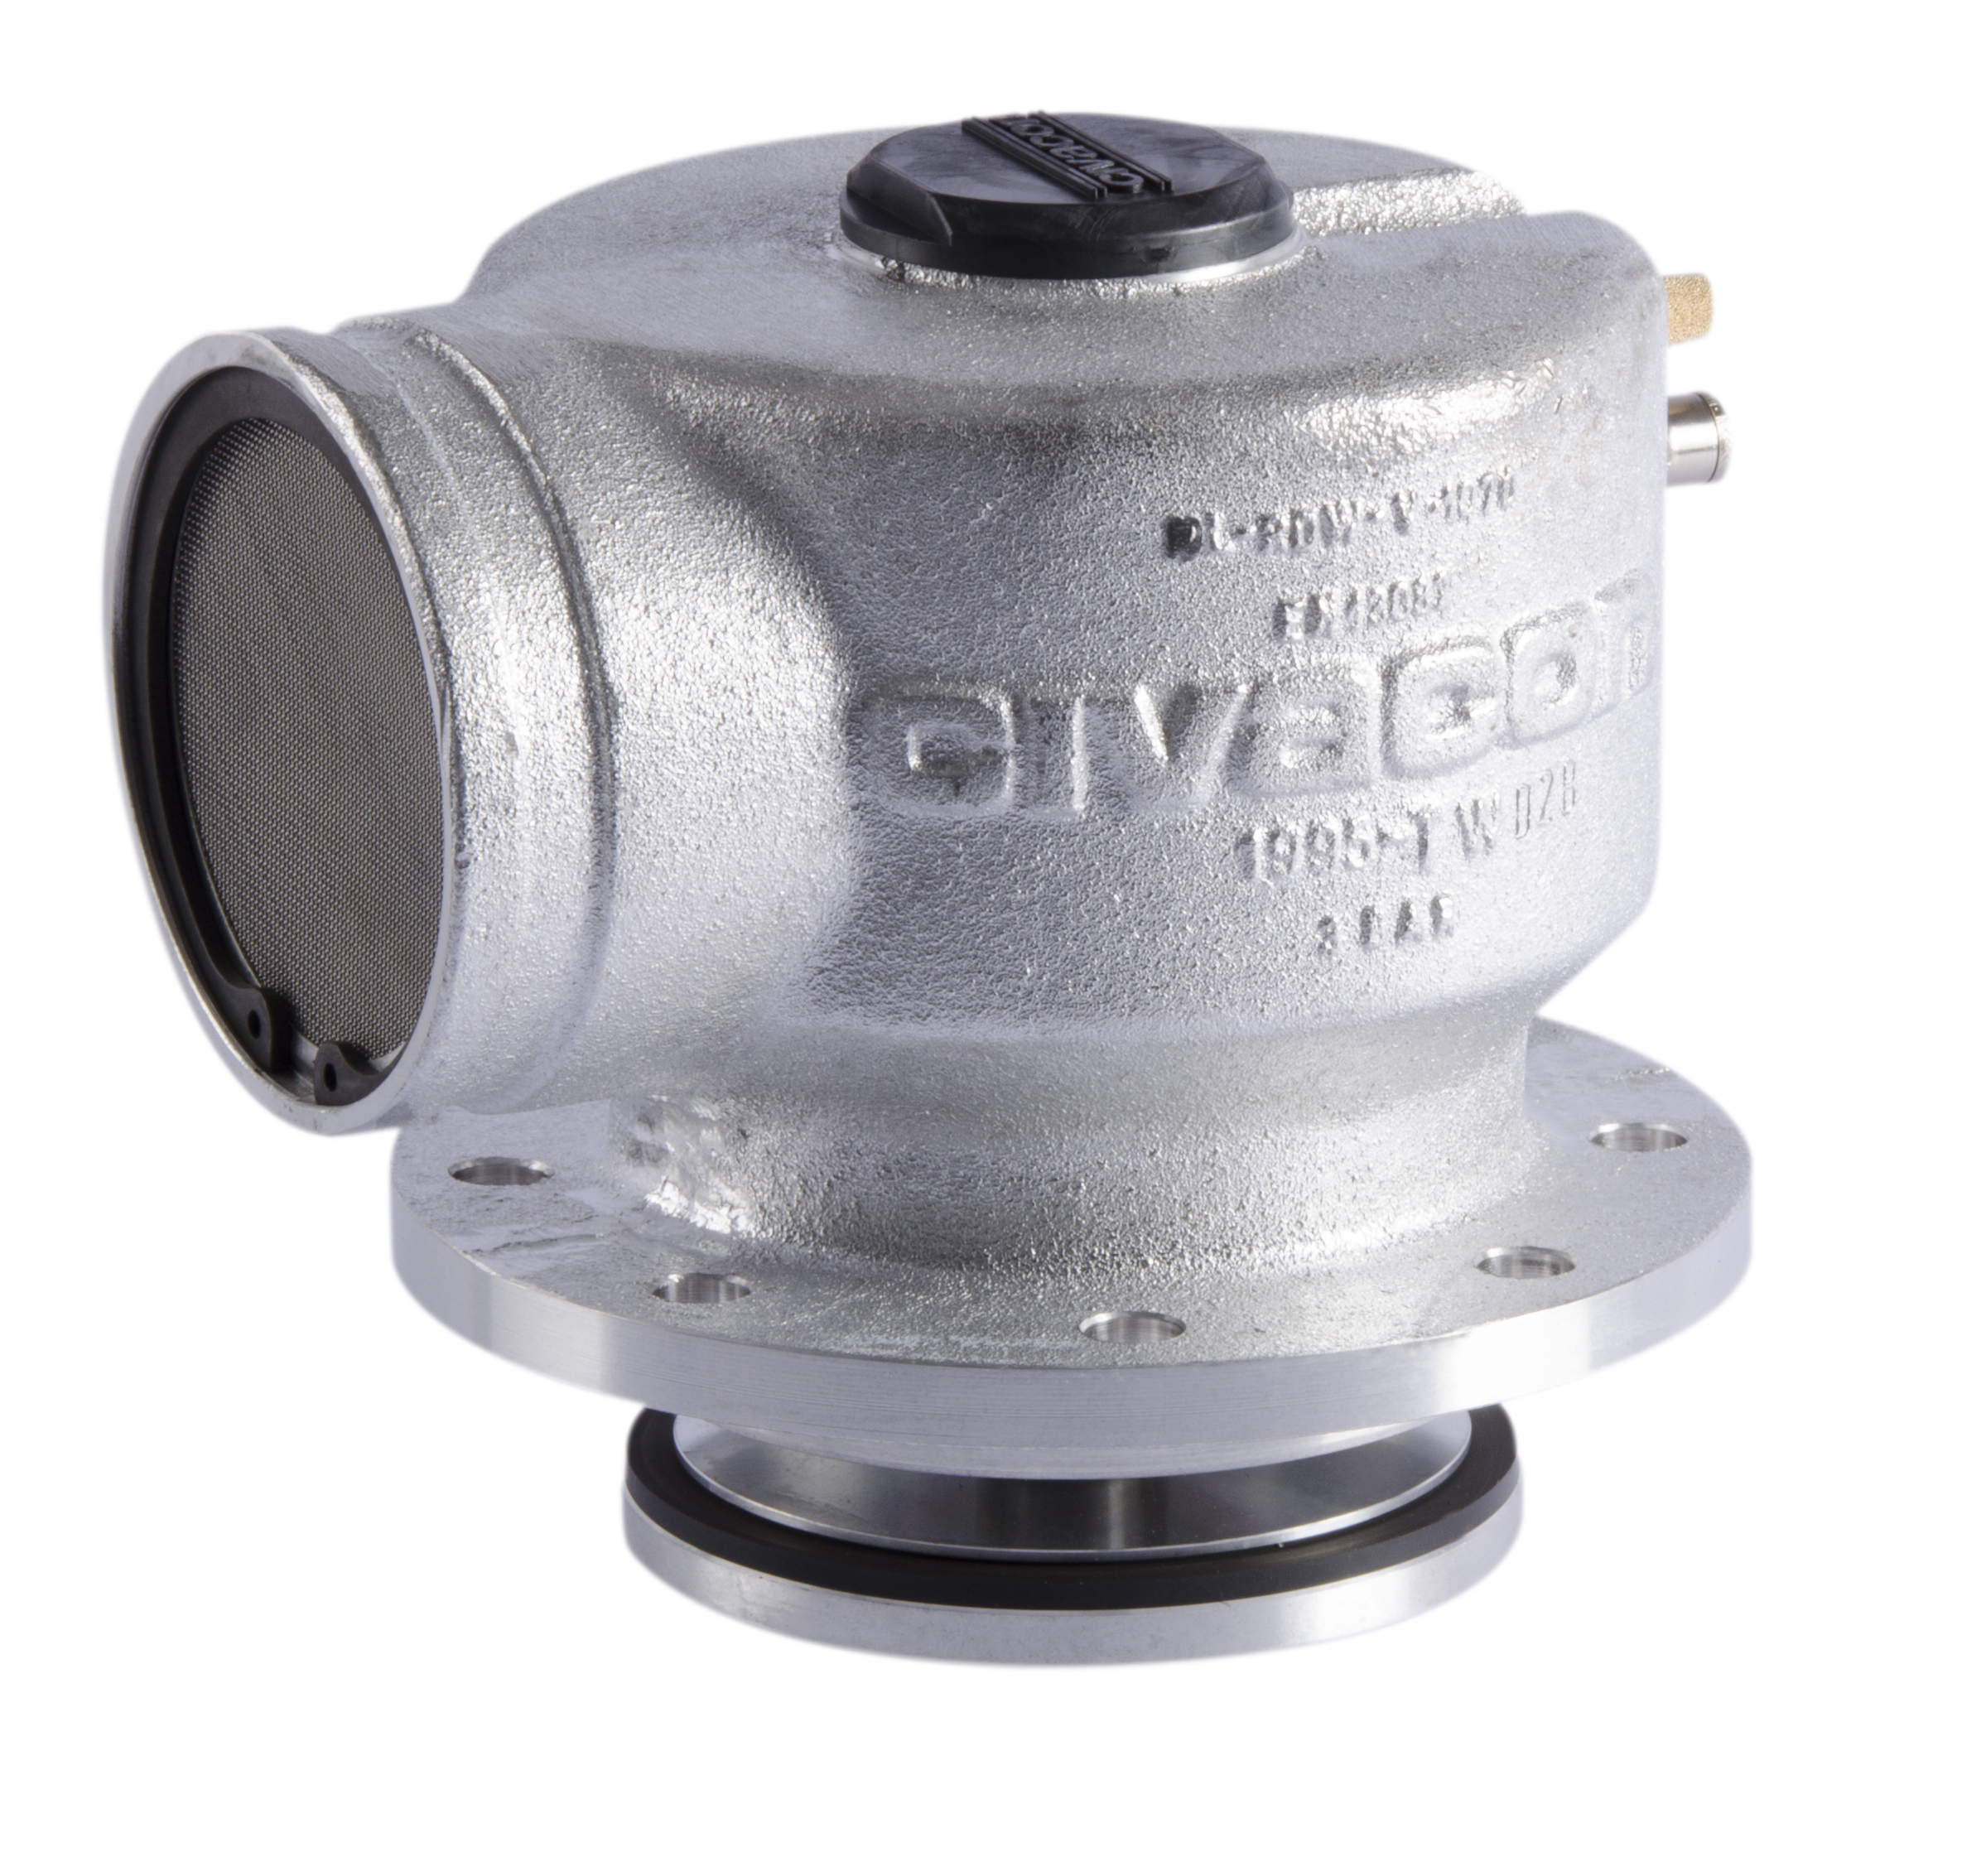 OPW SEQUENTIAL VENT VALVE E/W FLAME ARRESTOR